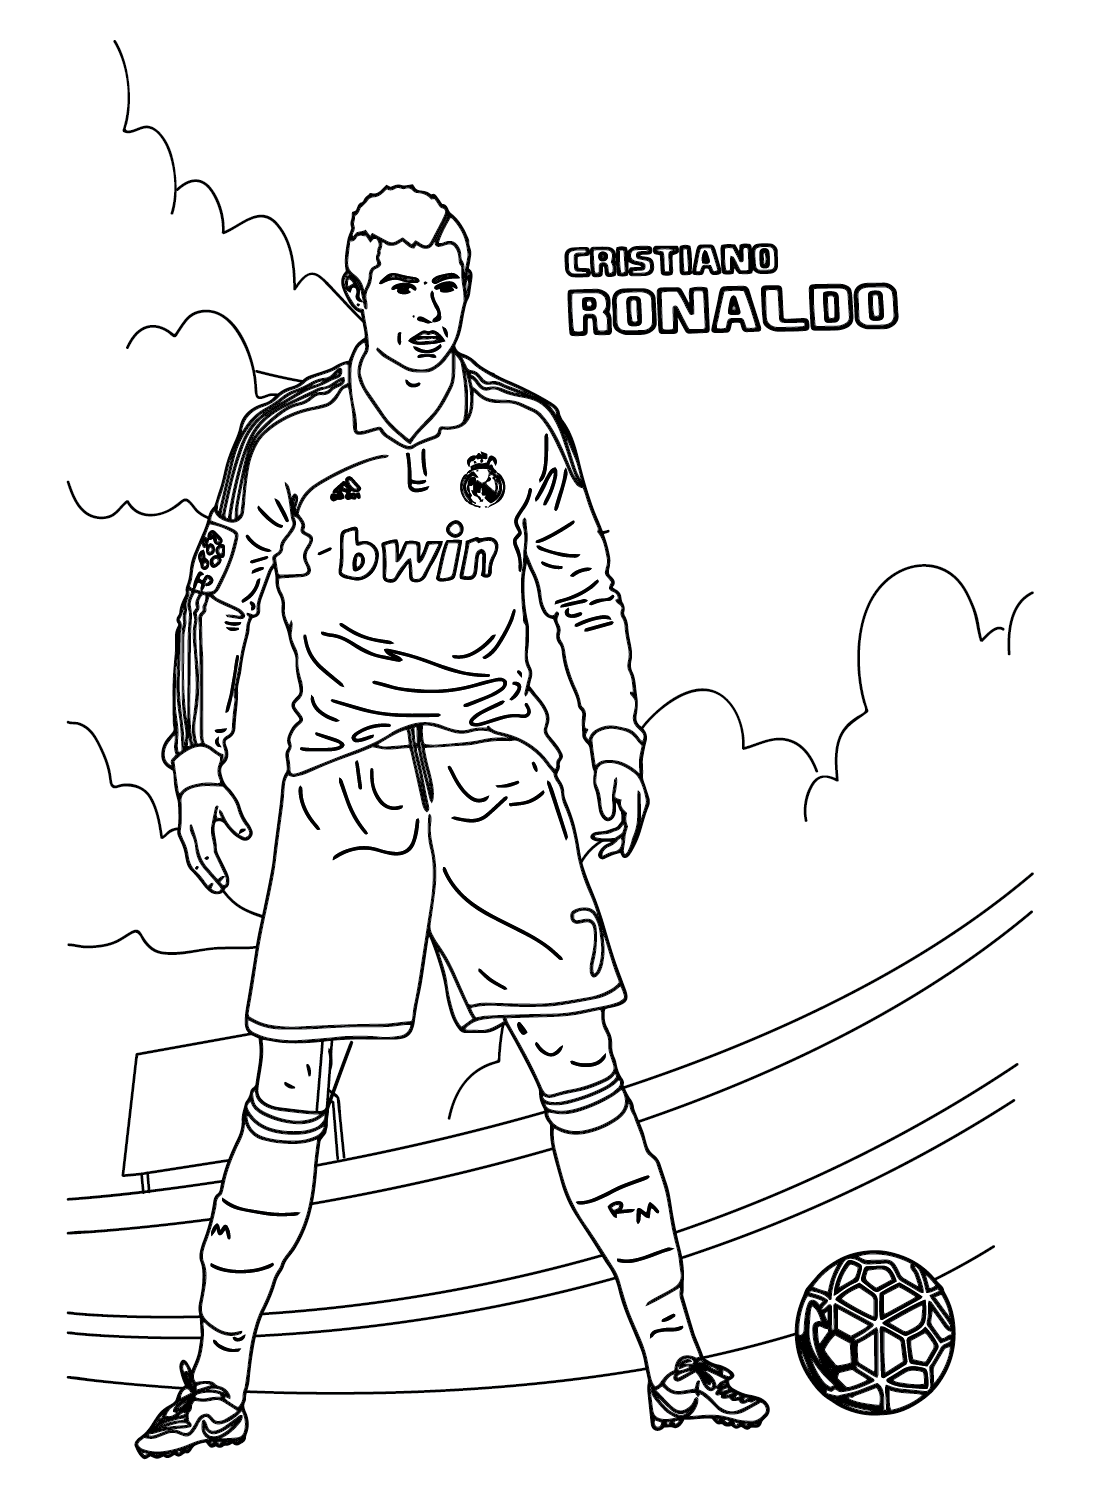 Cristiano Ronaldo World Cup Coloring Pages